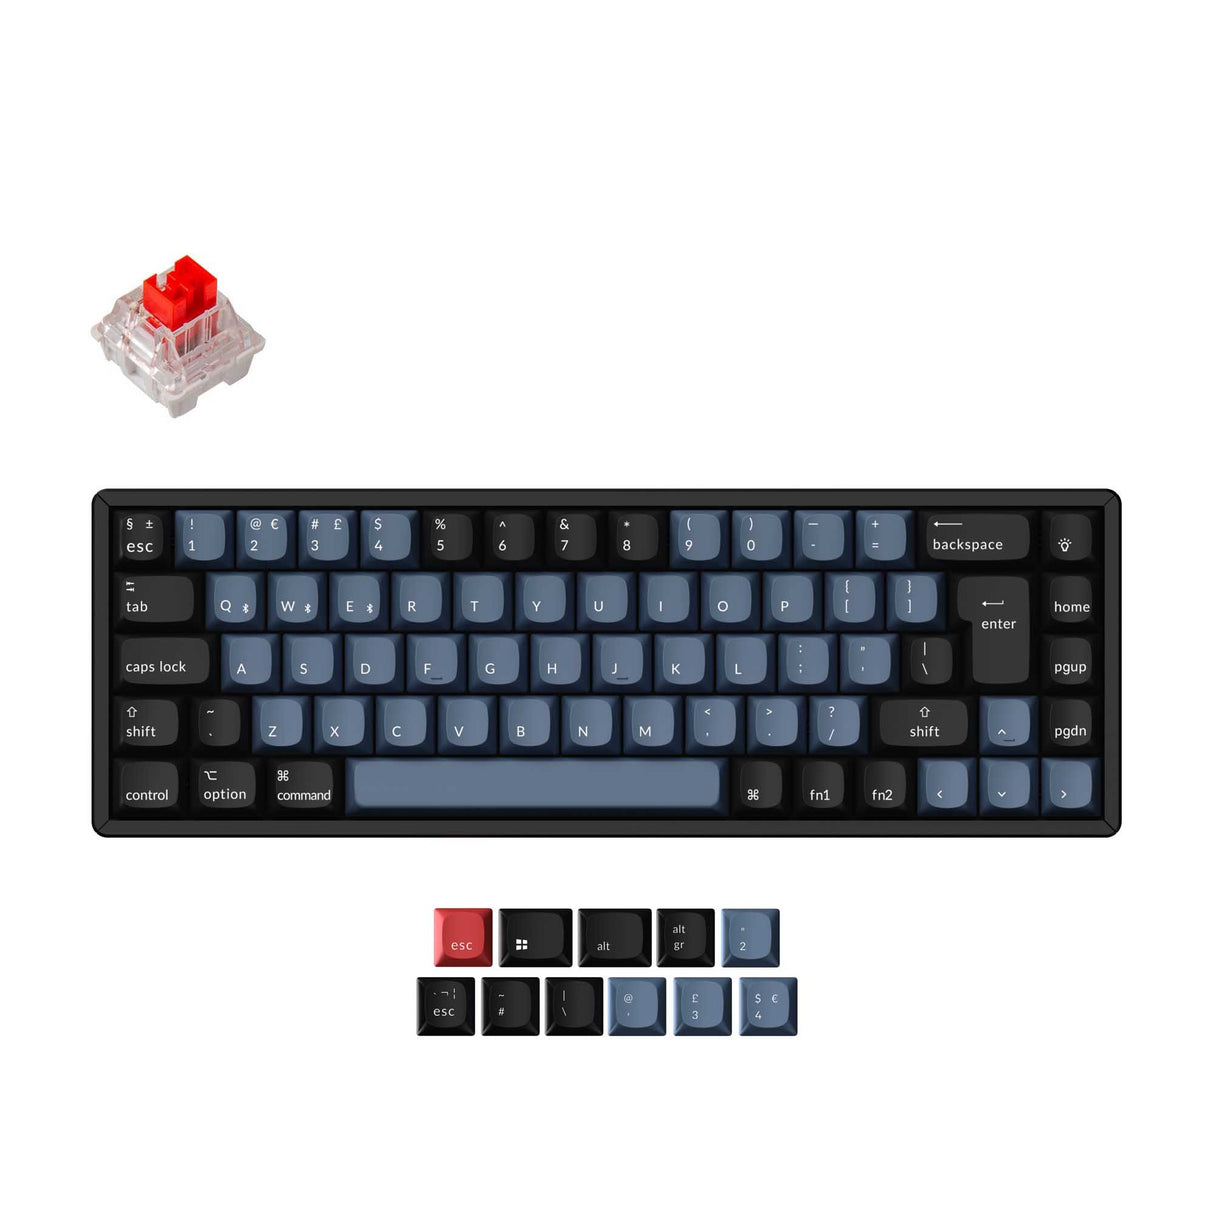 Keychron K6 Pro QMK/VIA Wireless Custom Mechanical Keyboard with 65% layout for Mac Windows Linux hot-swappable with MX switch RGB backlight UK ISO Layout